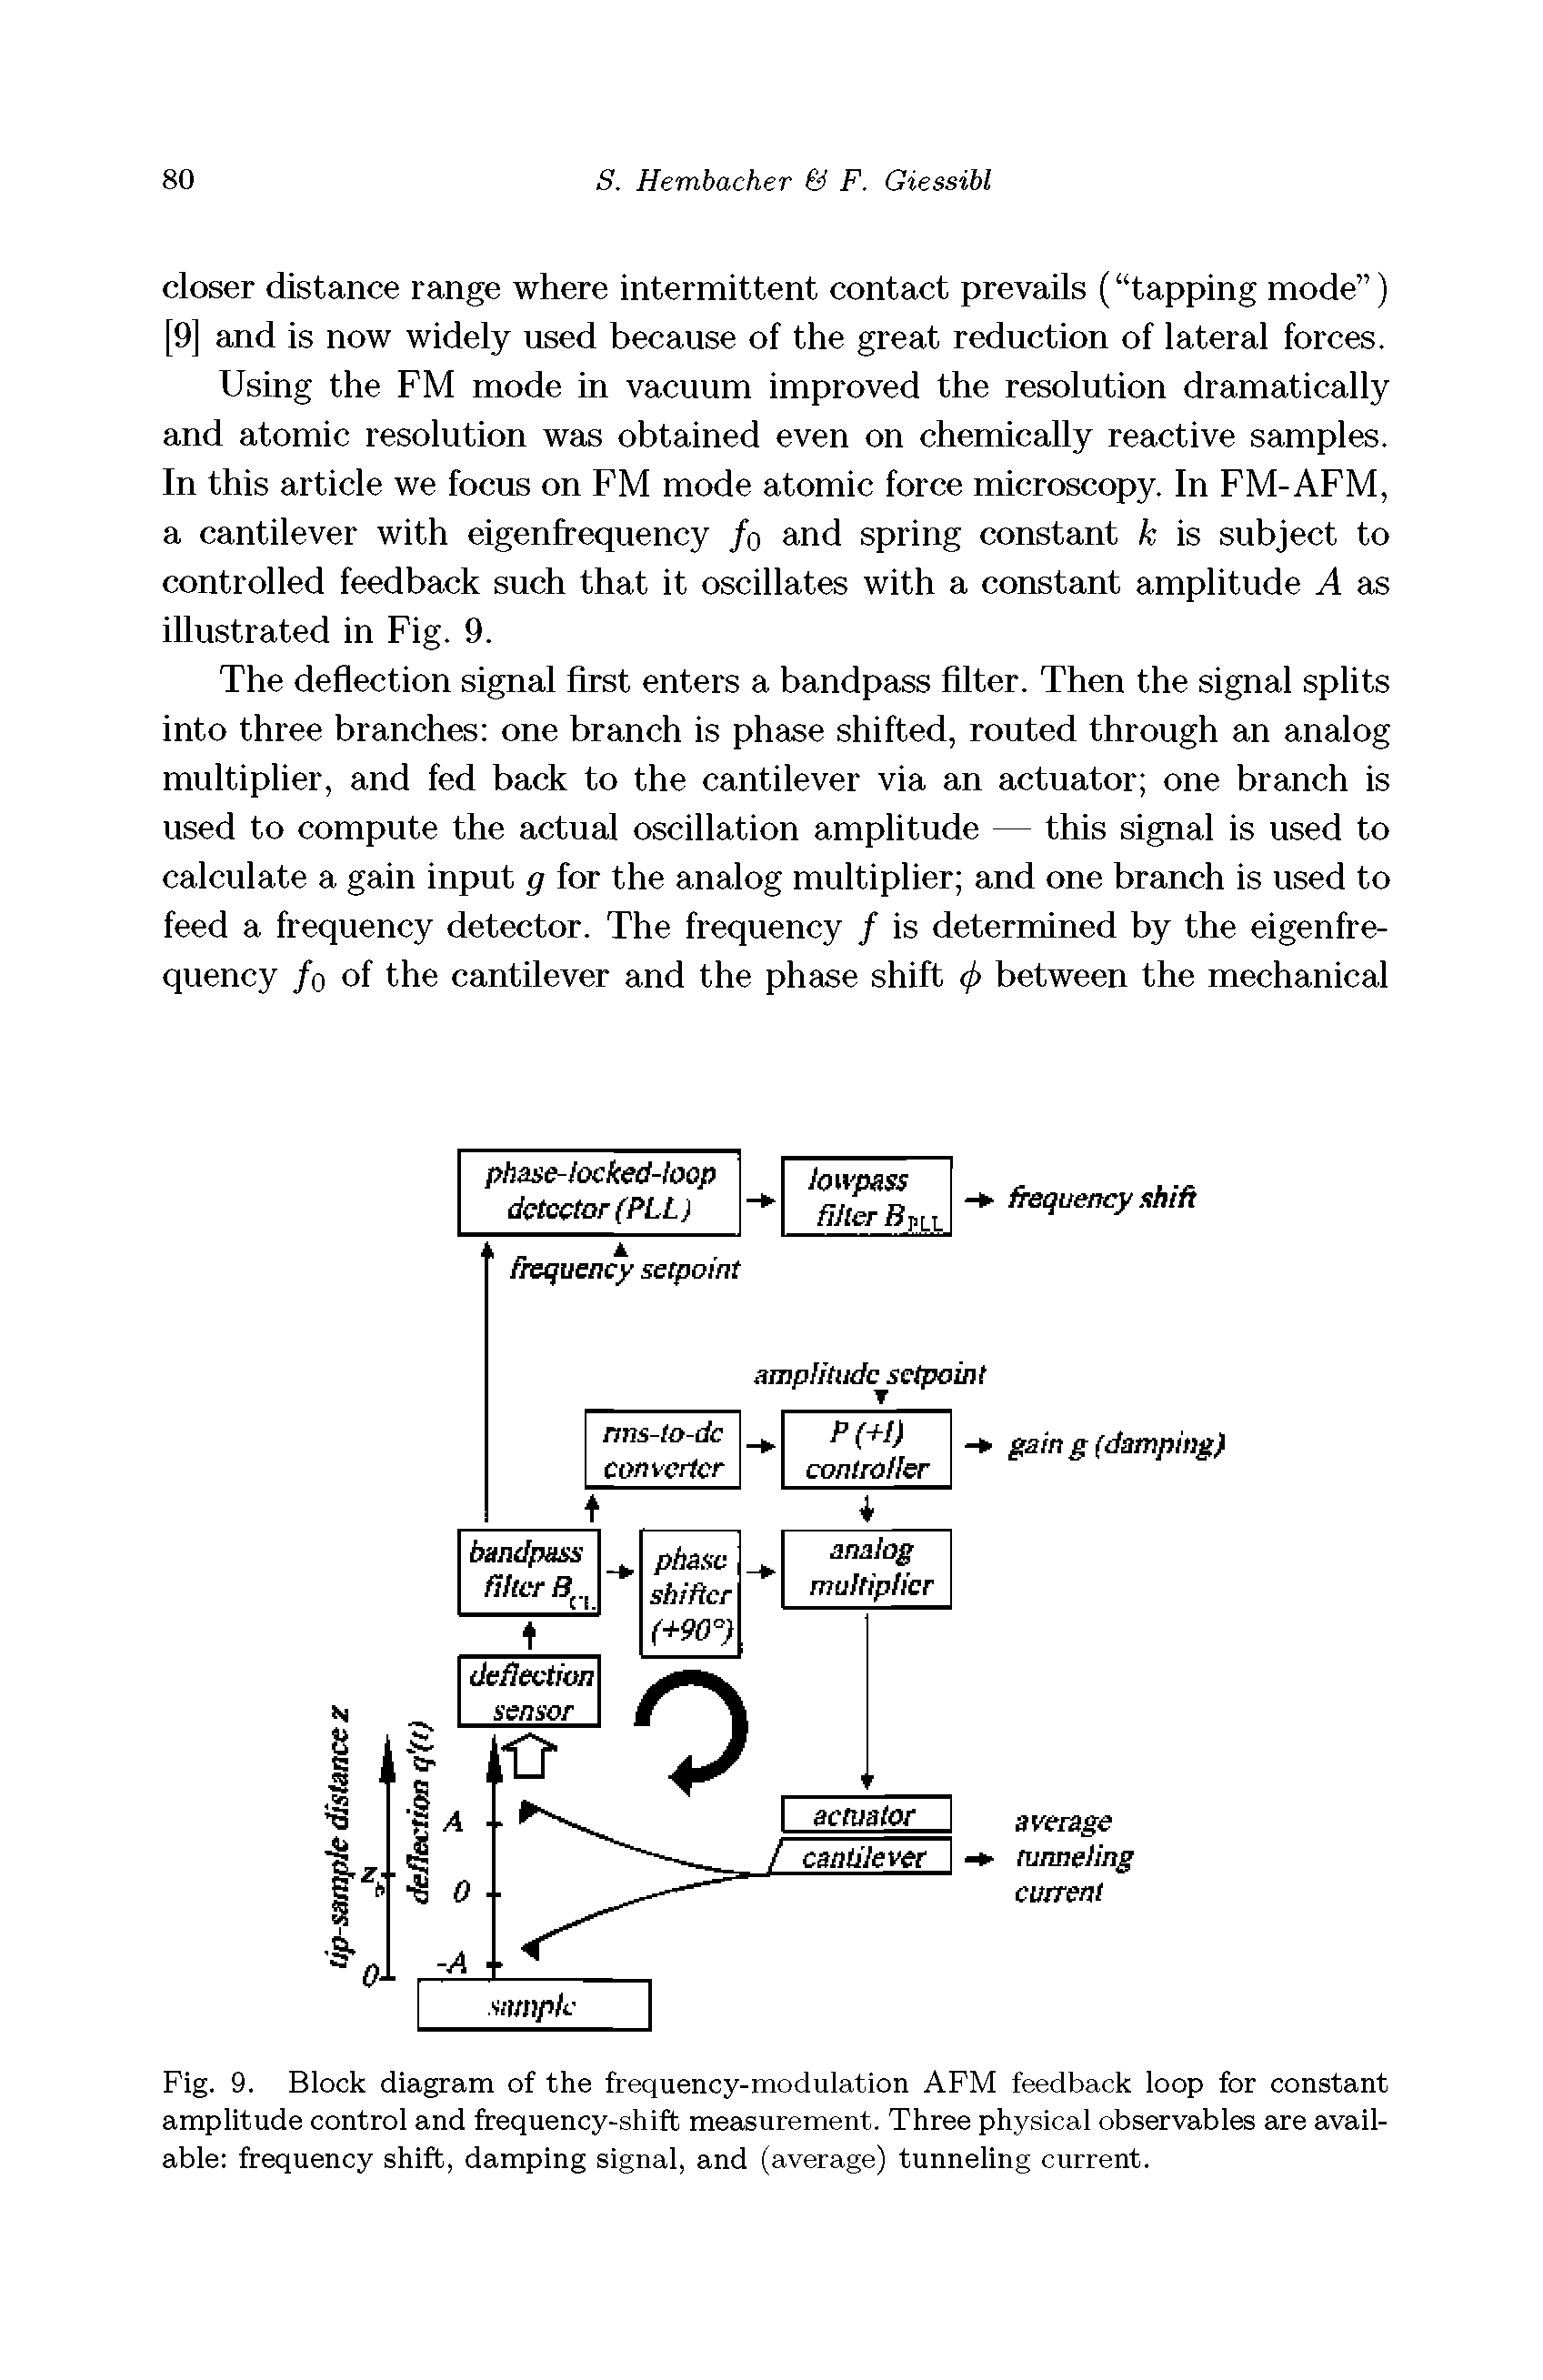 Fig. 9. Block diagram of the frequency-modulation AFM feedback loop for constant amplitude control and frequency-shift measurement. Three physical observables are available frequency shift, damping signal, and (average) tunneling current.